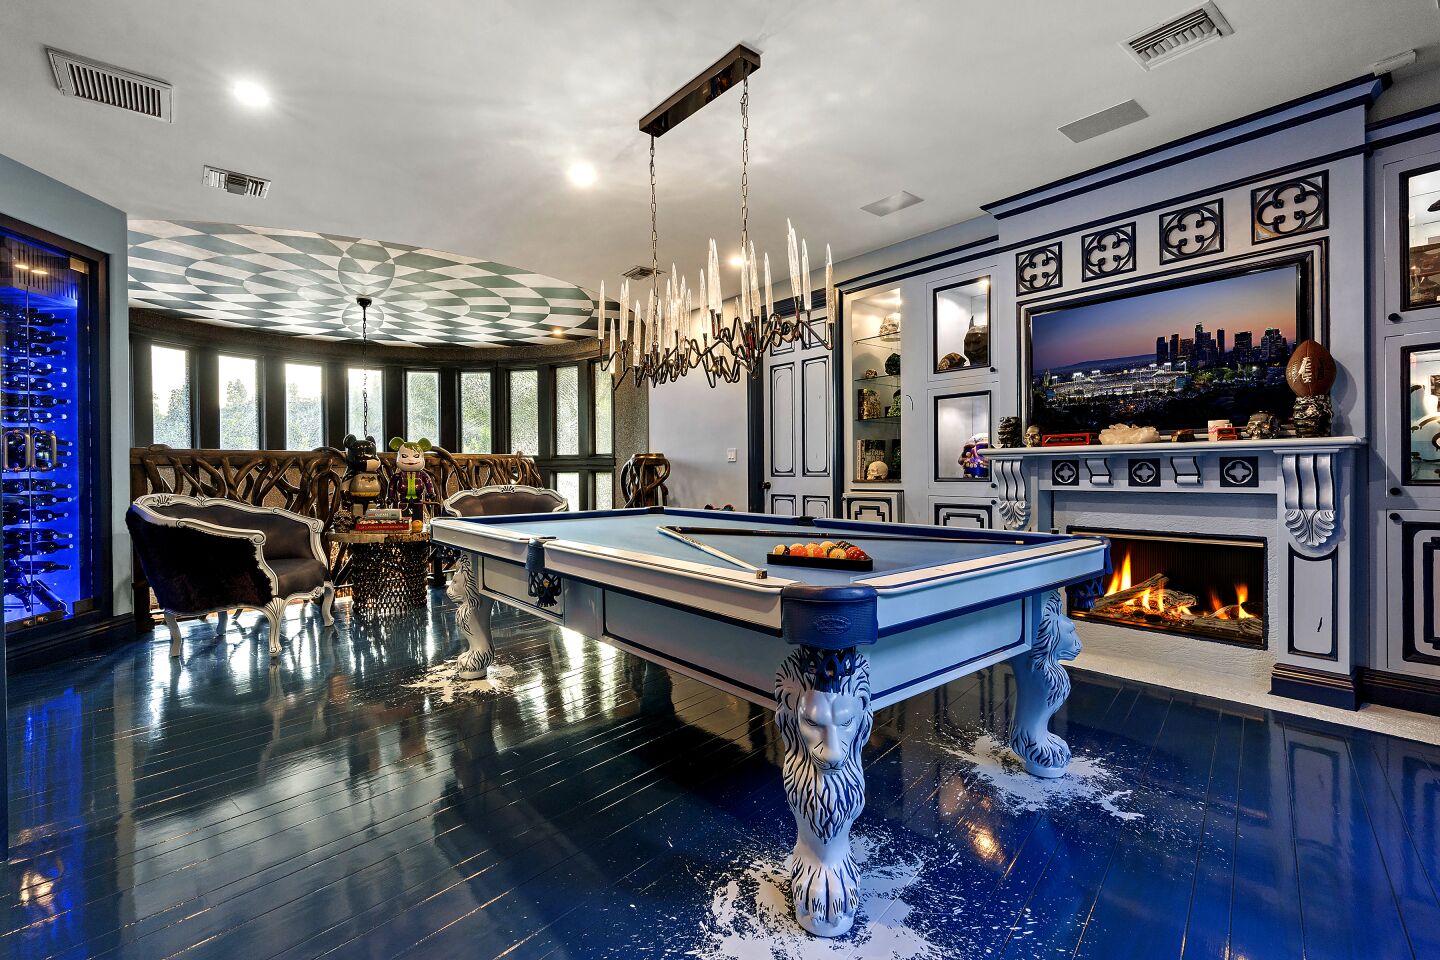 Beverages are close at hand in the billiards room, which has splashes of white paint on the floor.